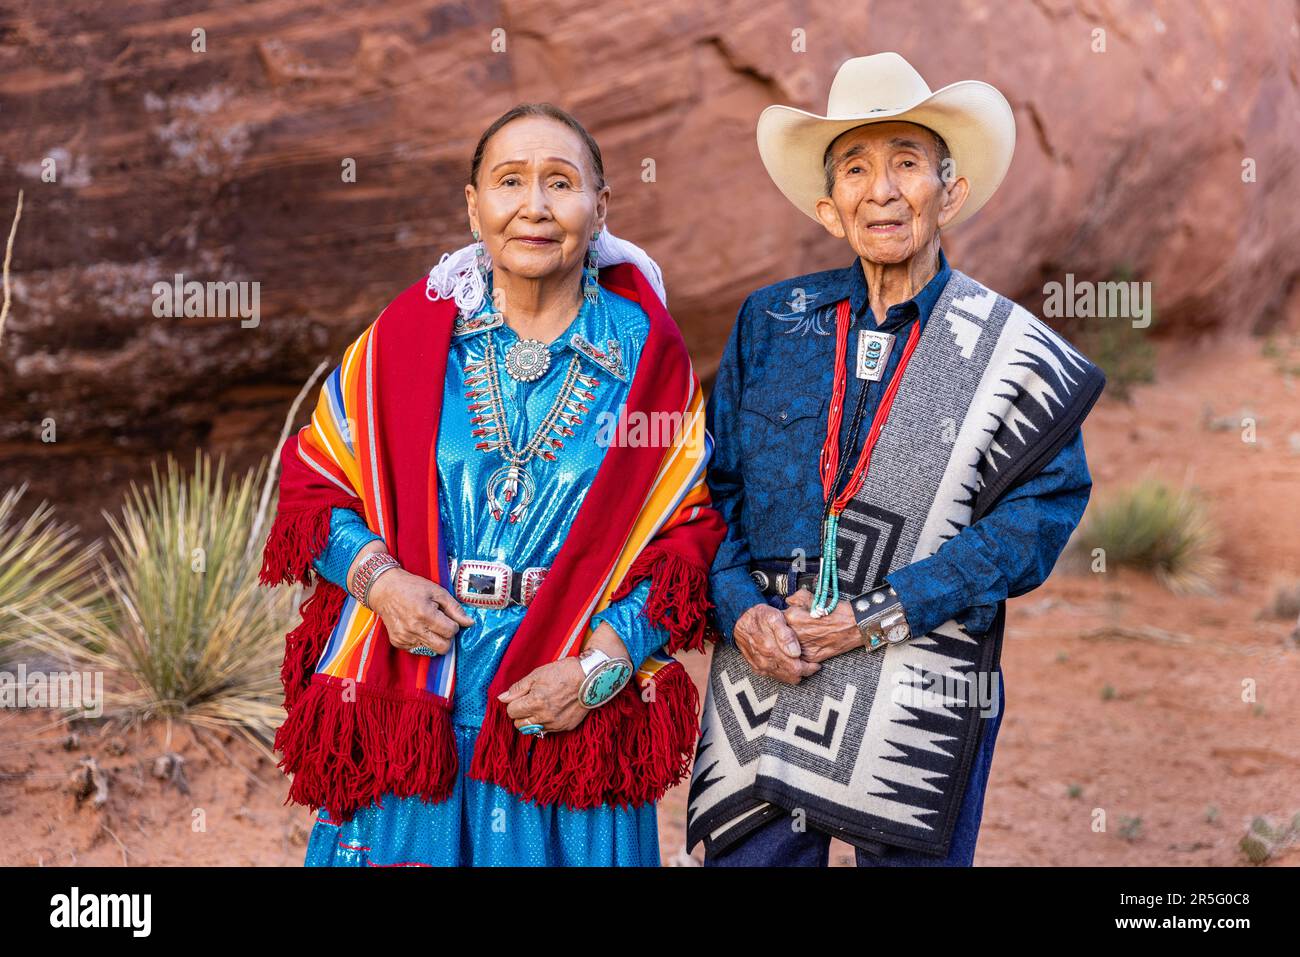 American Indian Navajo couple in Mystery Valley of Monument Valley Navajo Tribal Park, Arizona, United States Stock Photo